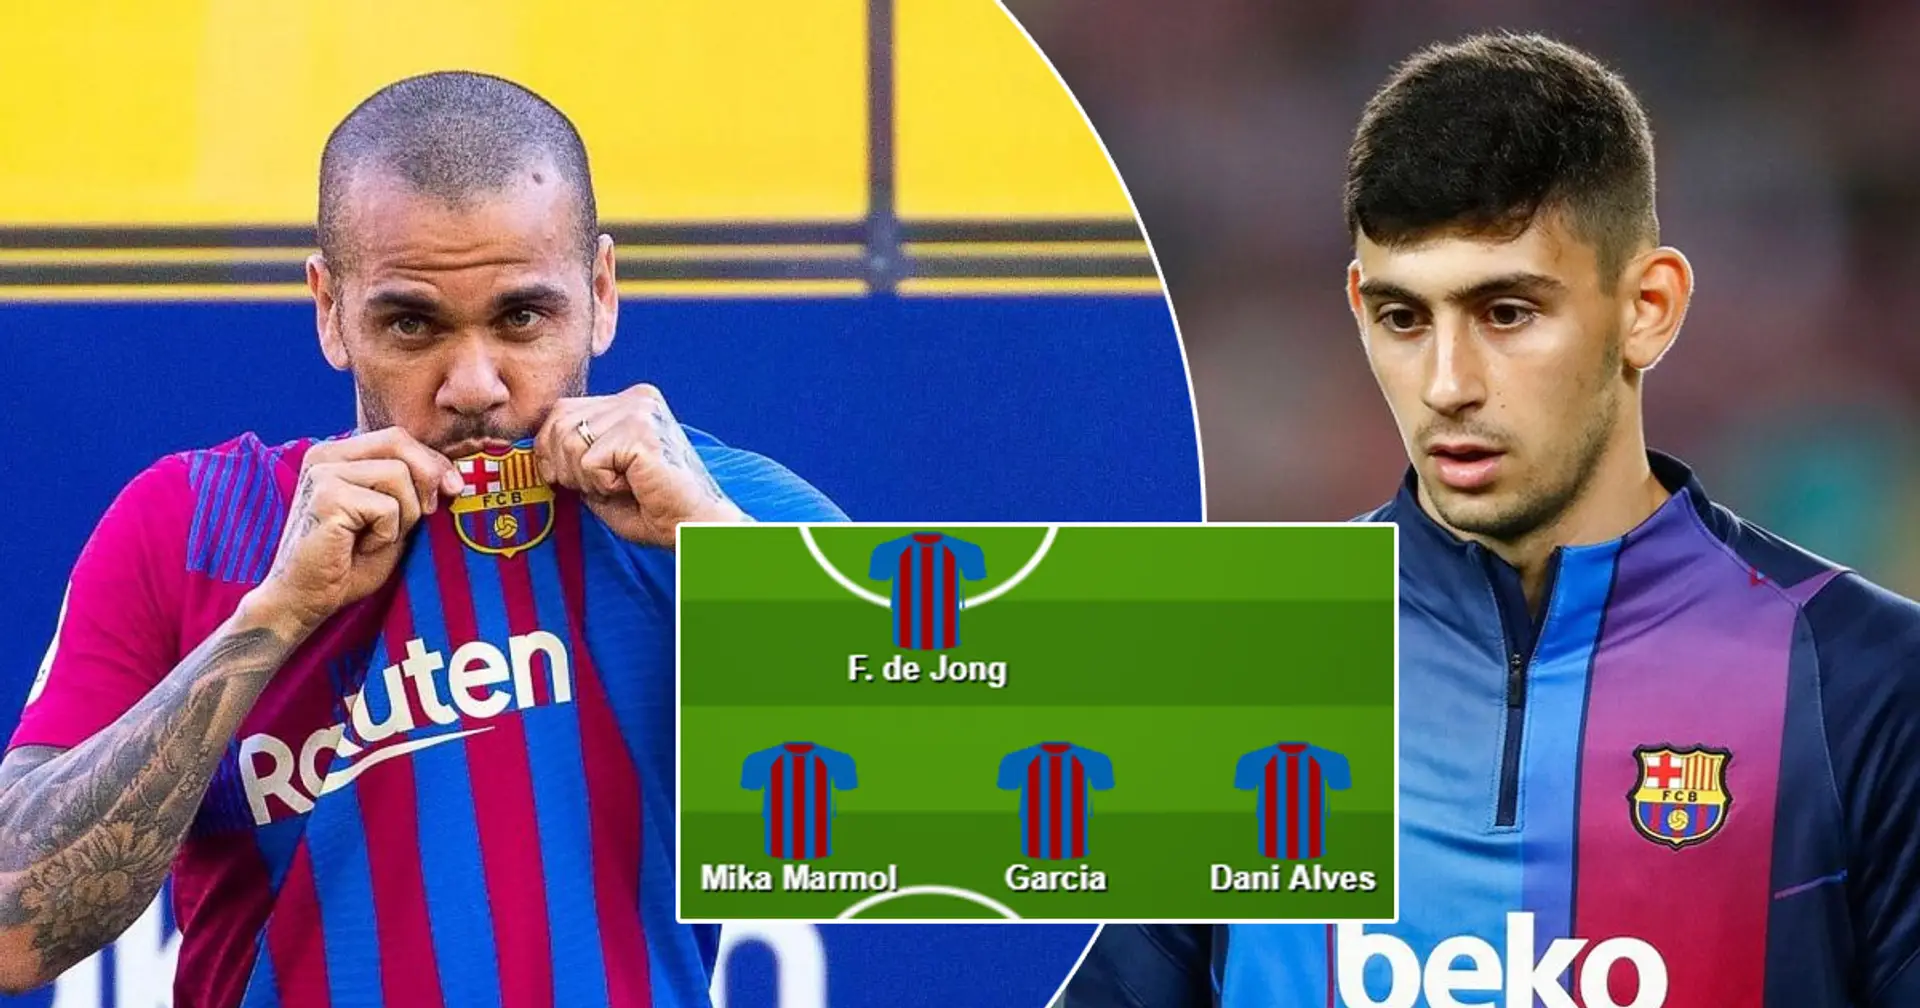 Dani Alves to start? Select Barca's ultimate XI for Boca Juniors friendly from 3 options